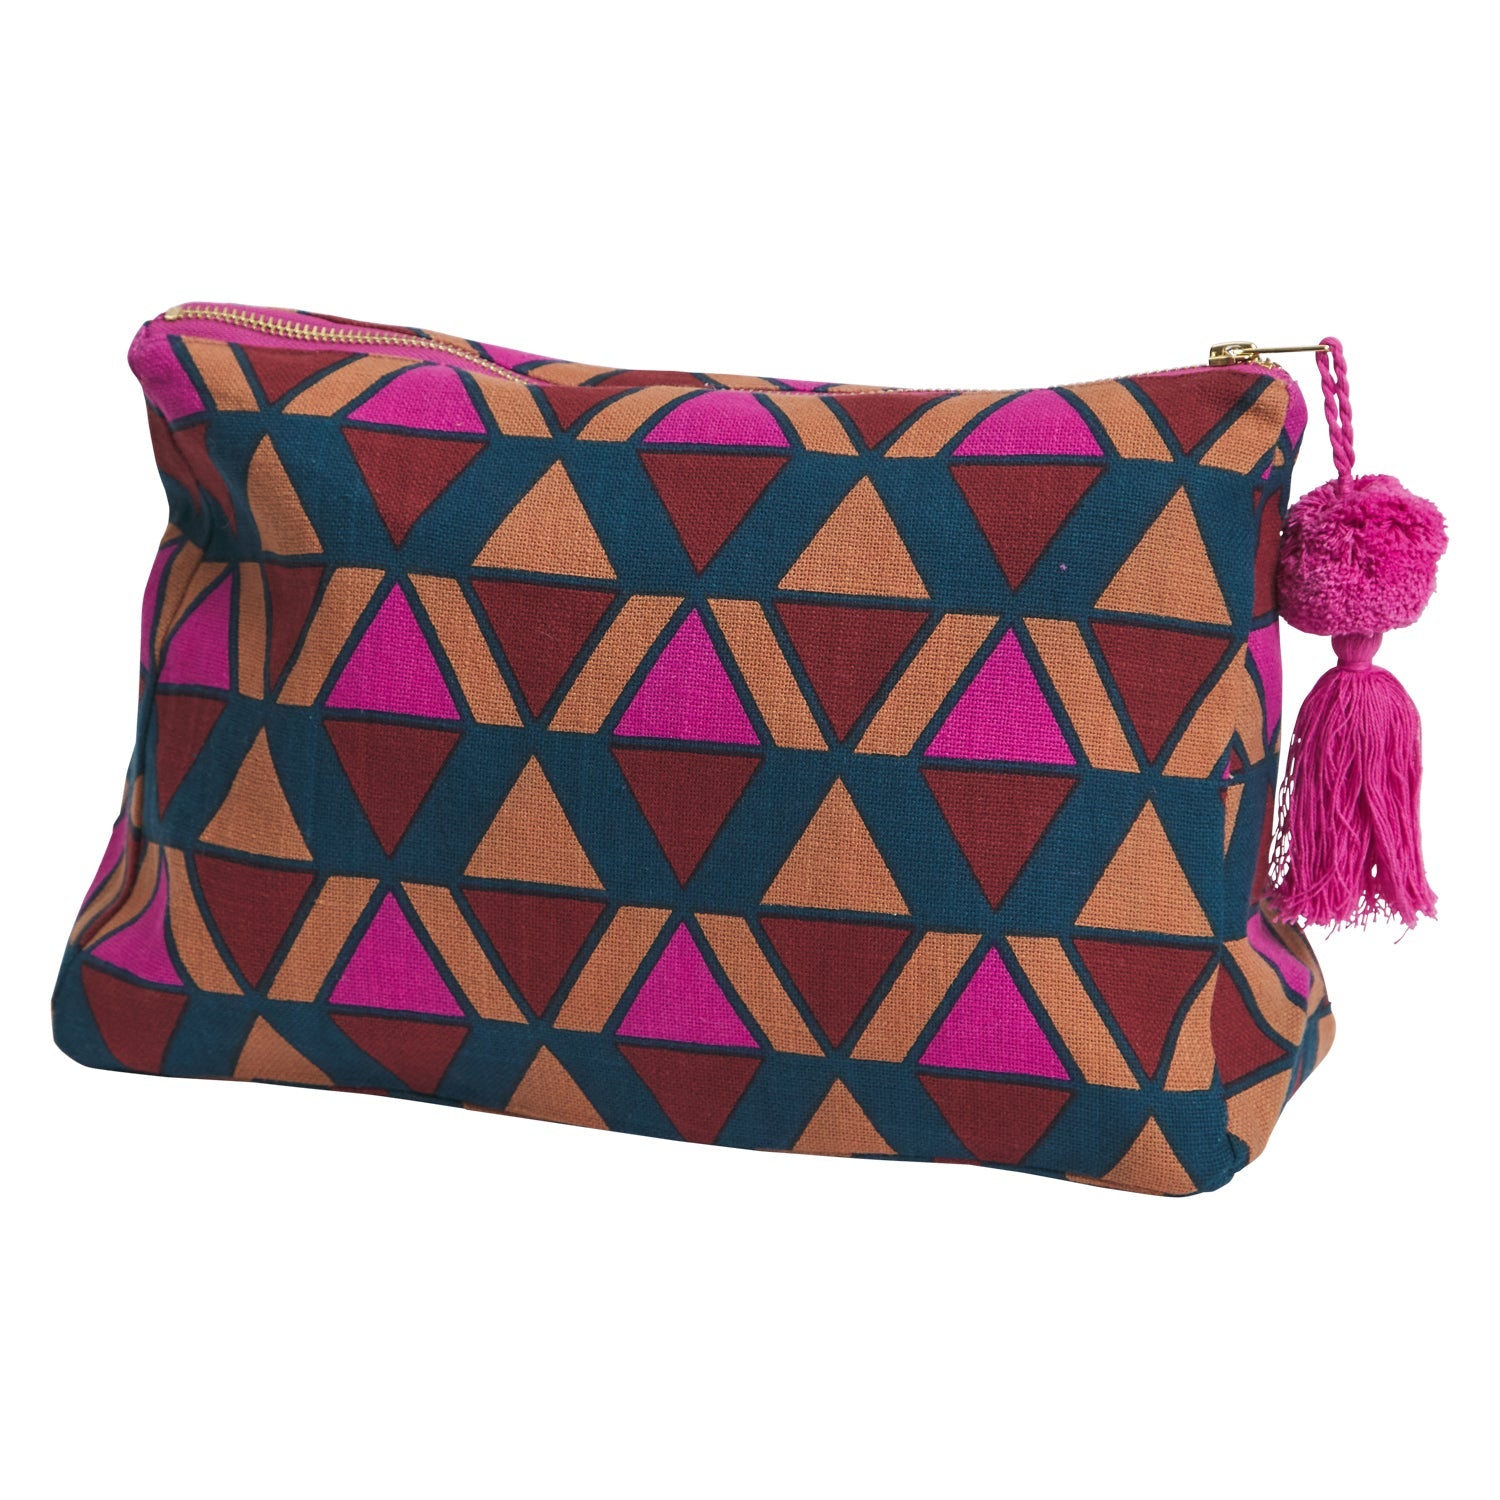 Sage and Clare - Pirro Cosmetic Bag